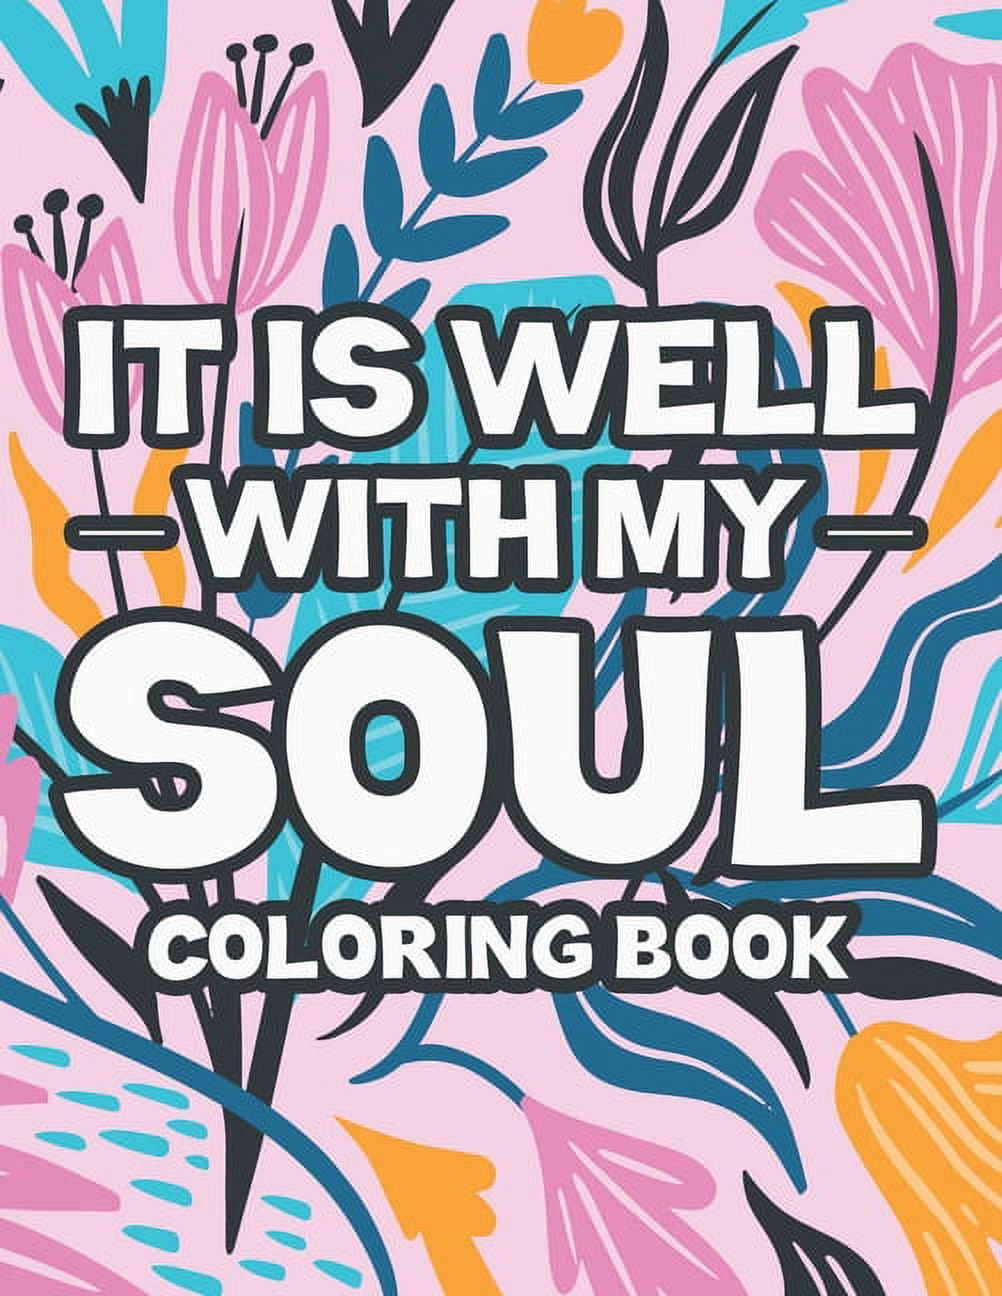 It is well with my soul coloring book stress relieving christian faith coloring book devotional coloring pages with floral designs and inspirational bible verses christian coloring journal paperback